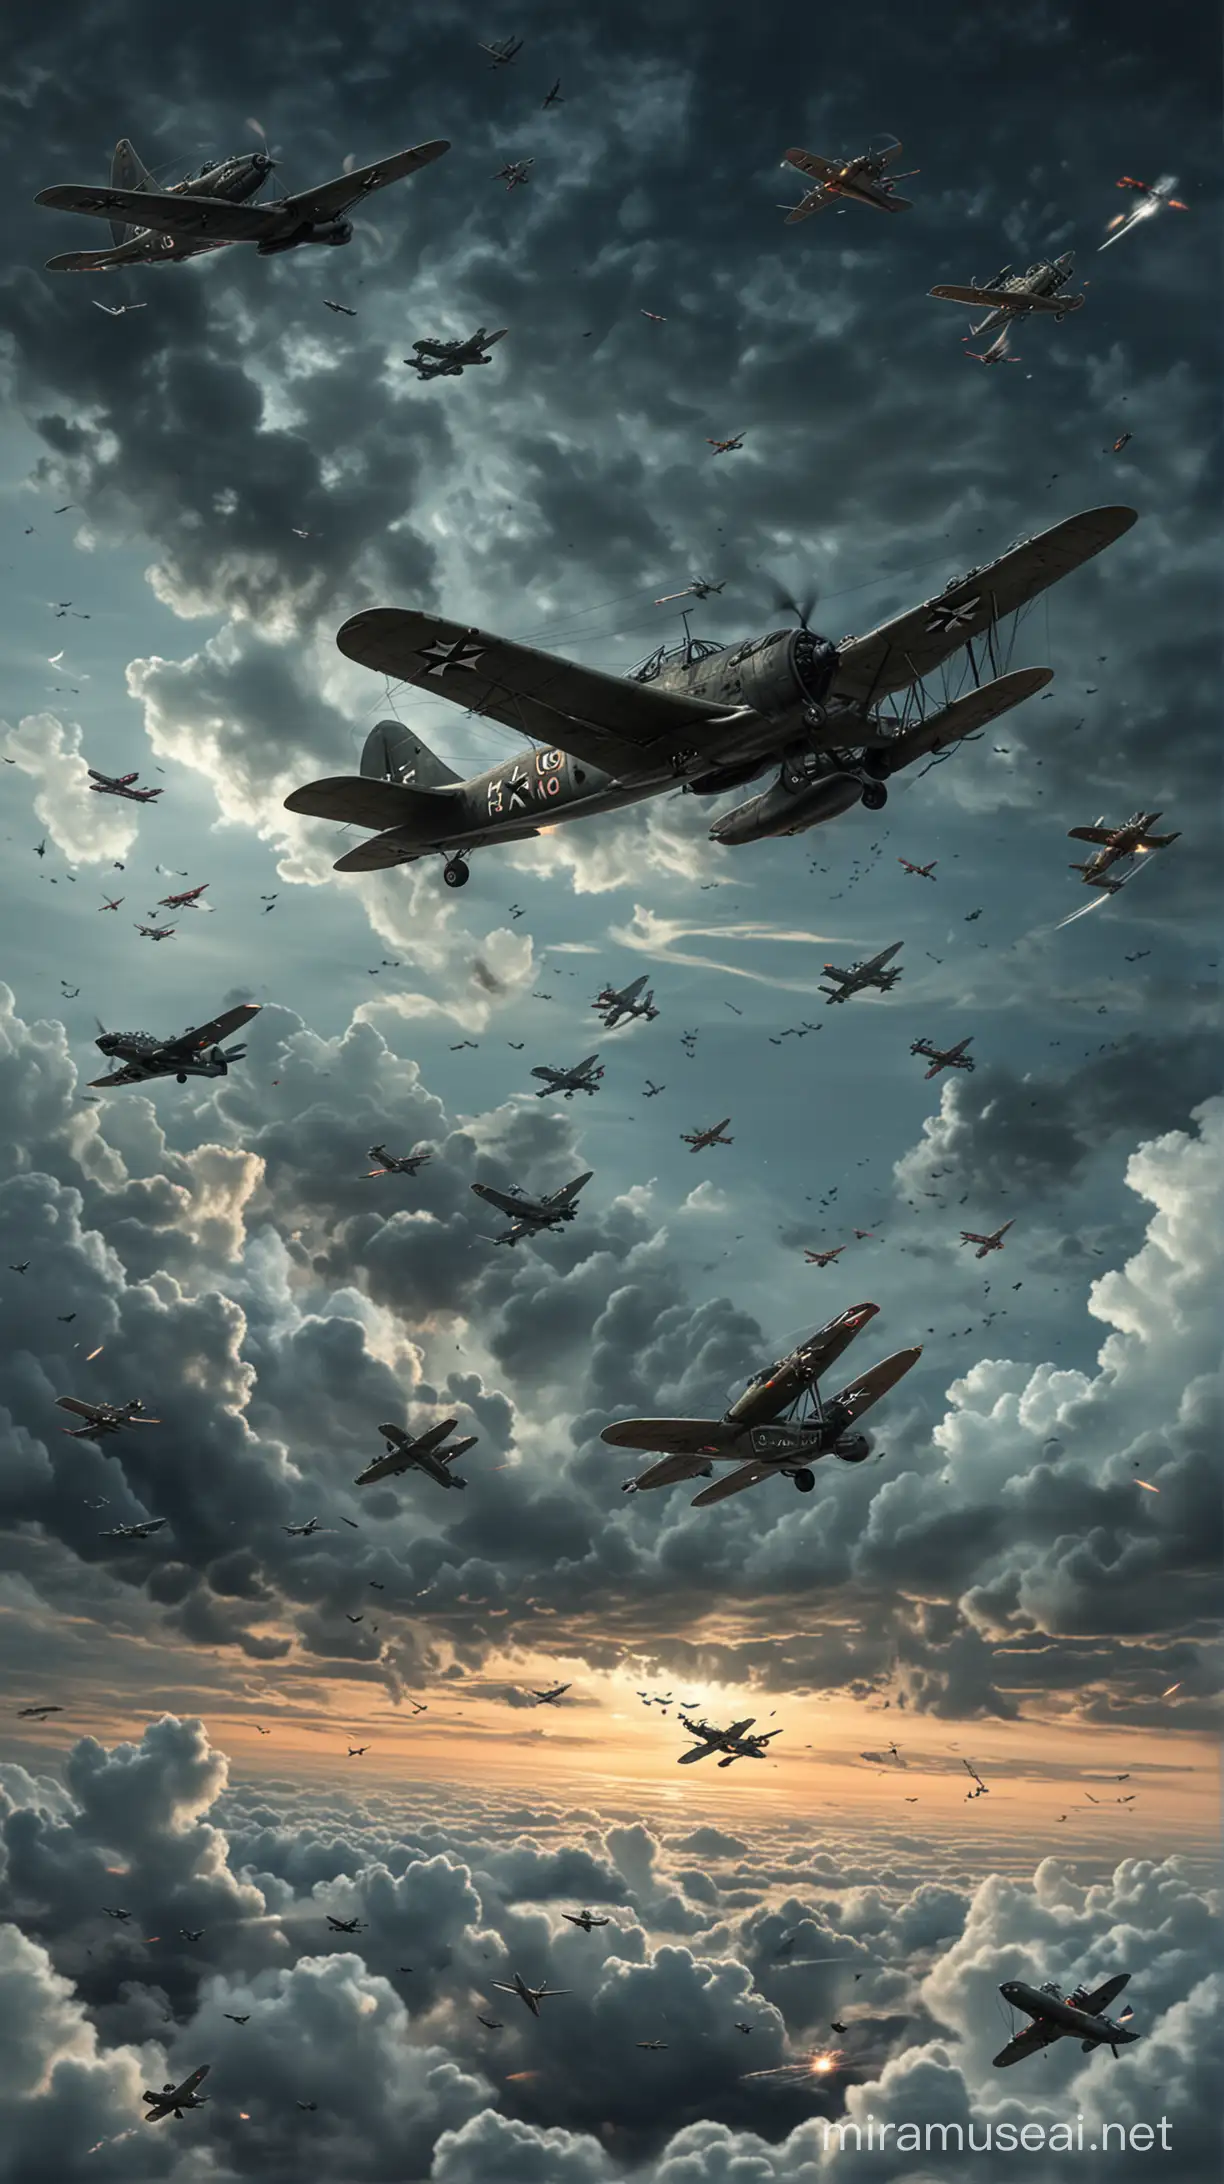 Artwork depicting the Night Witches flying overhead, accompanied by the whooshing noise of their planes. Hyper realistic